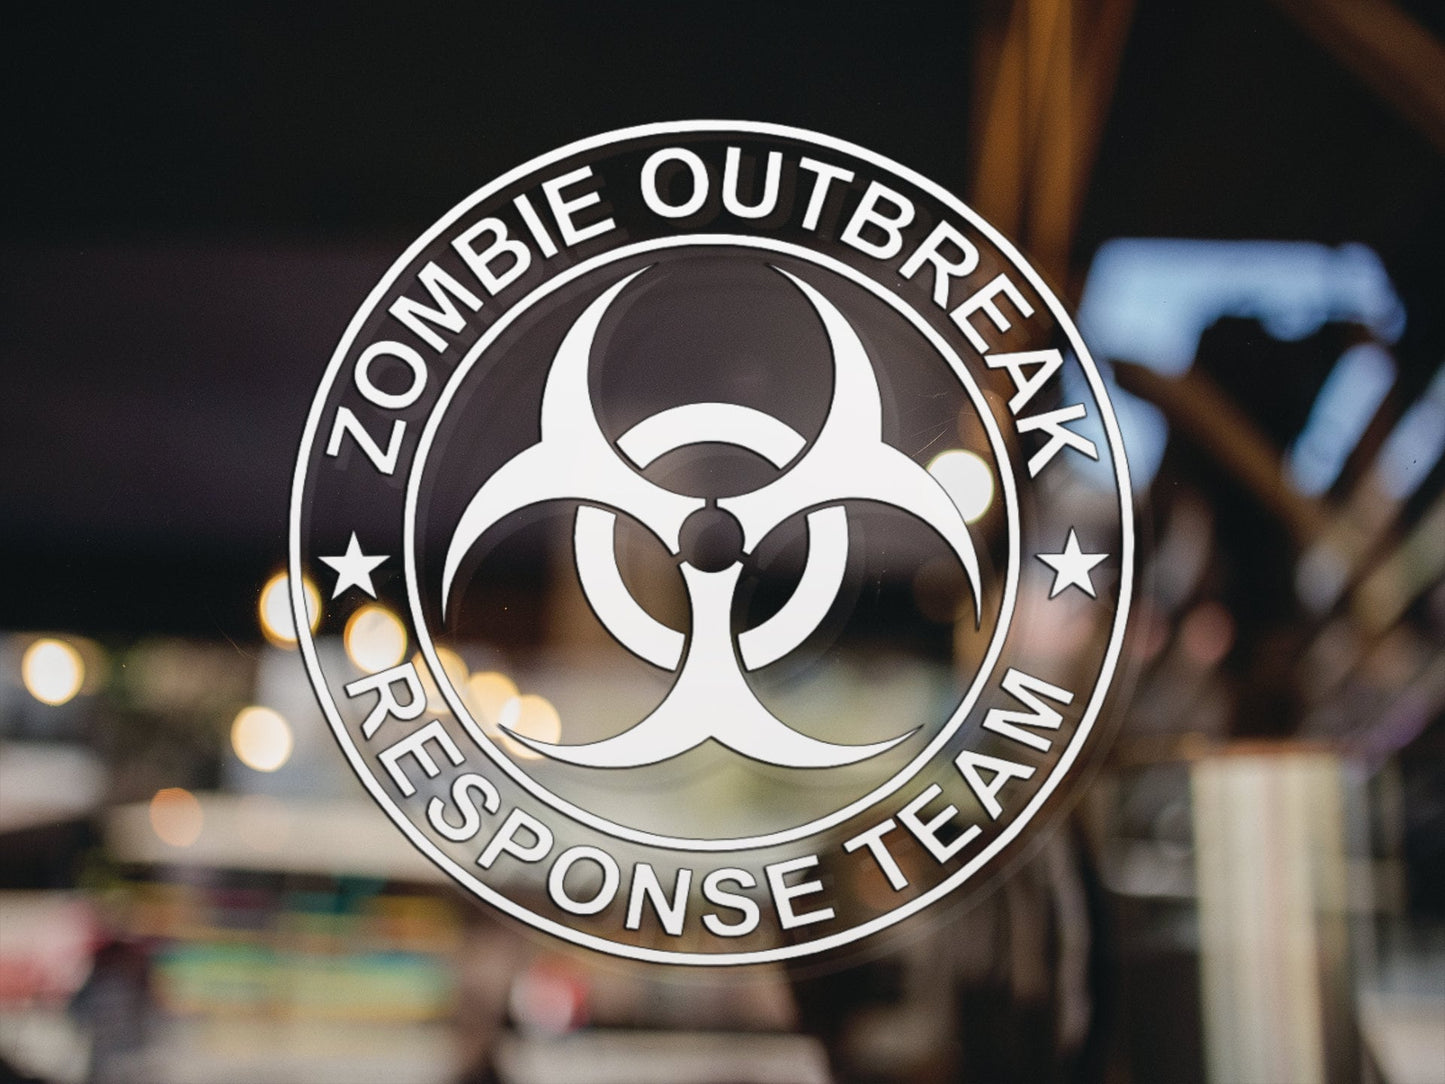 Zombie Outbreak Decal - Many Colors & Sizes